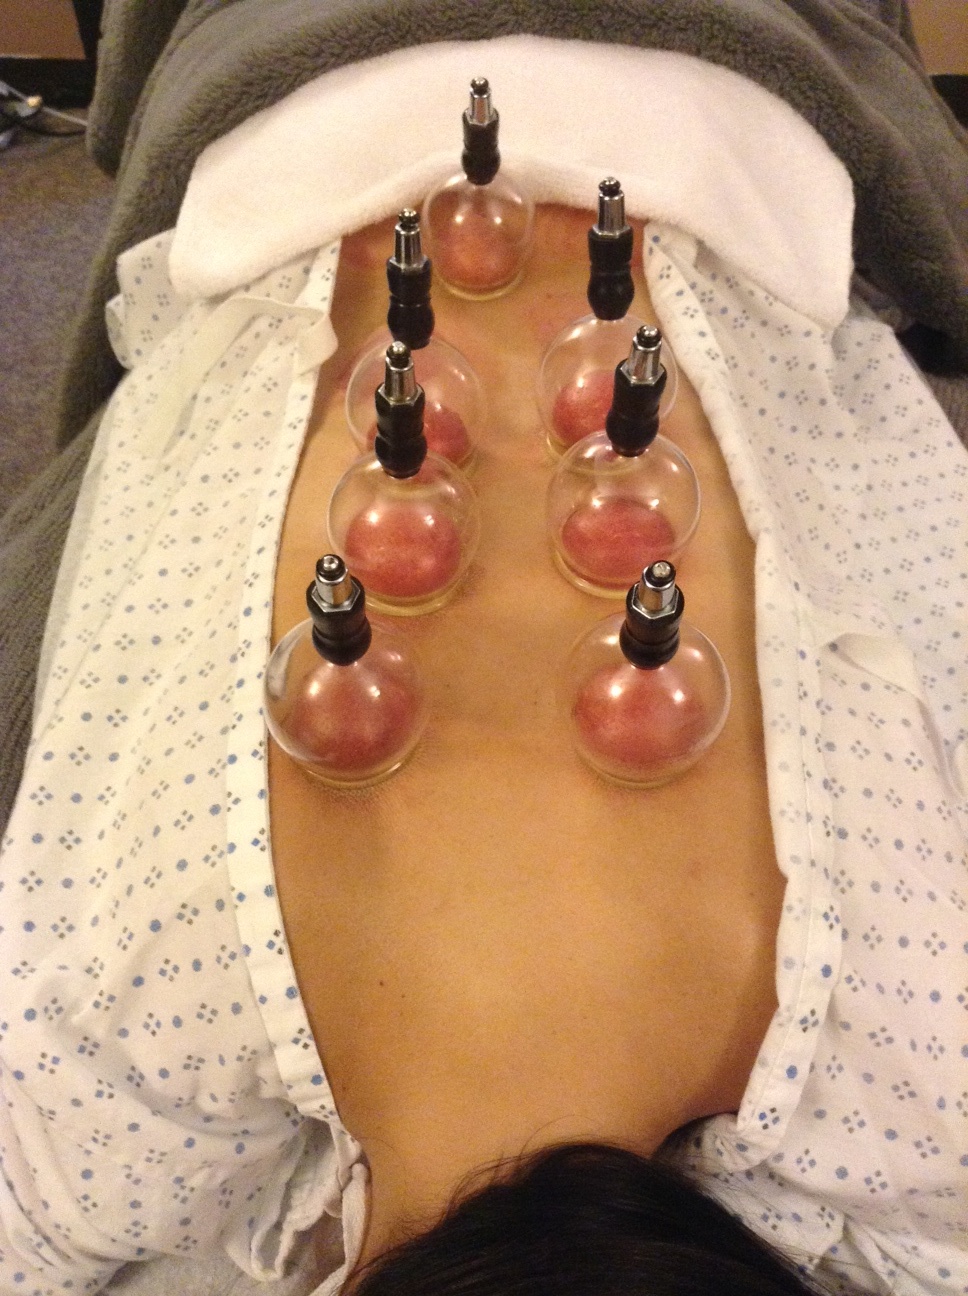 cupping-before.jpg